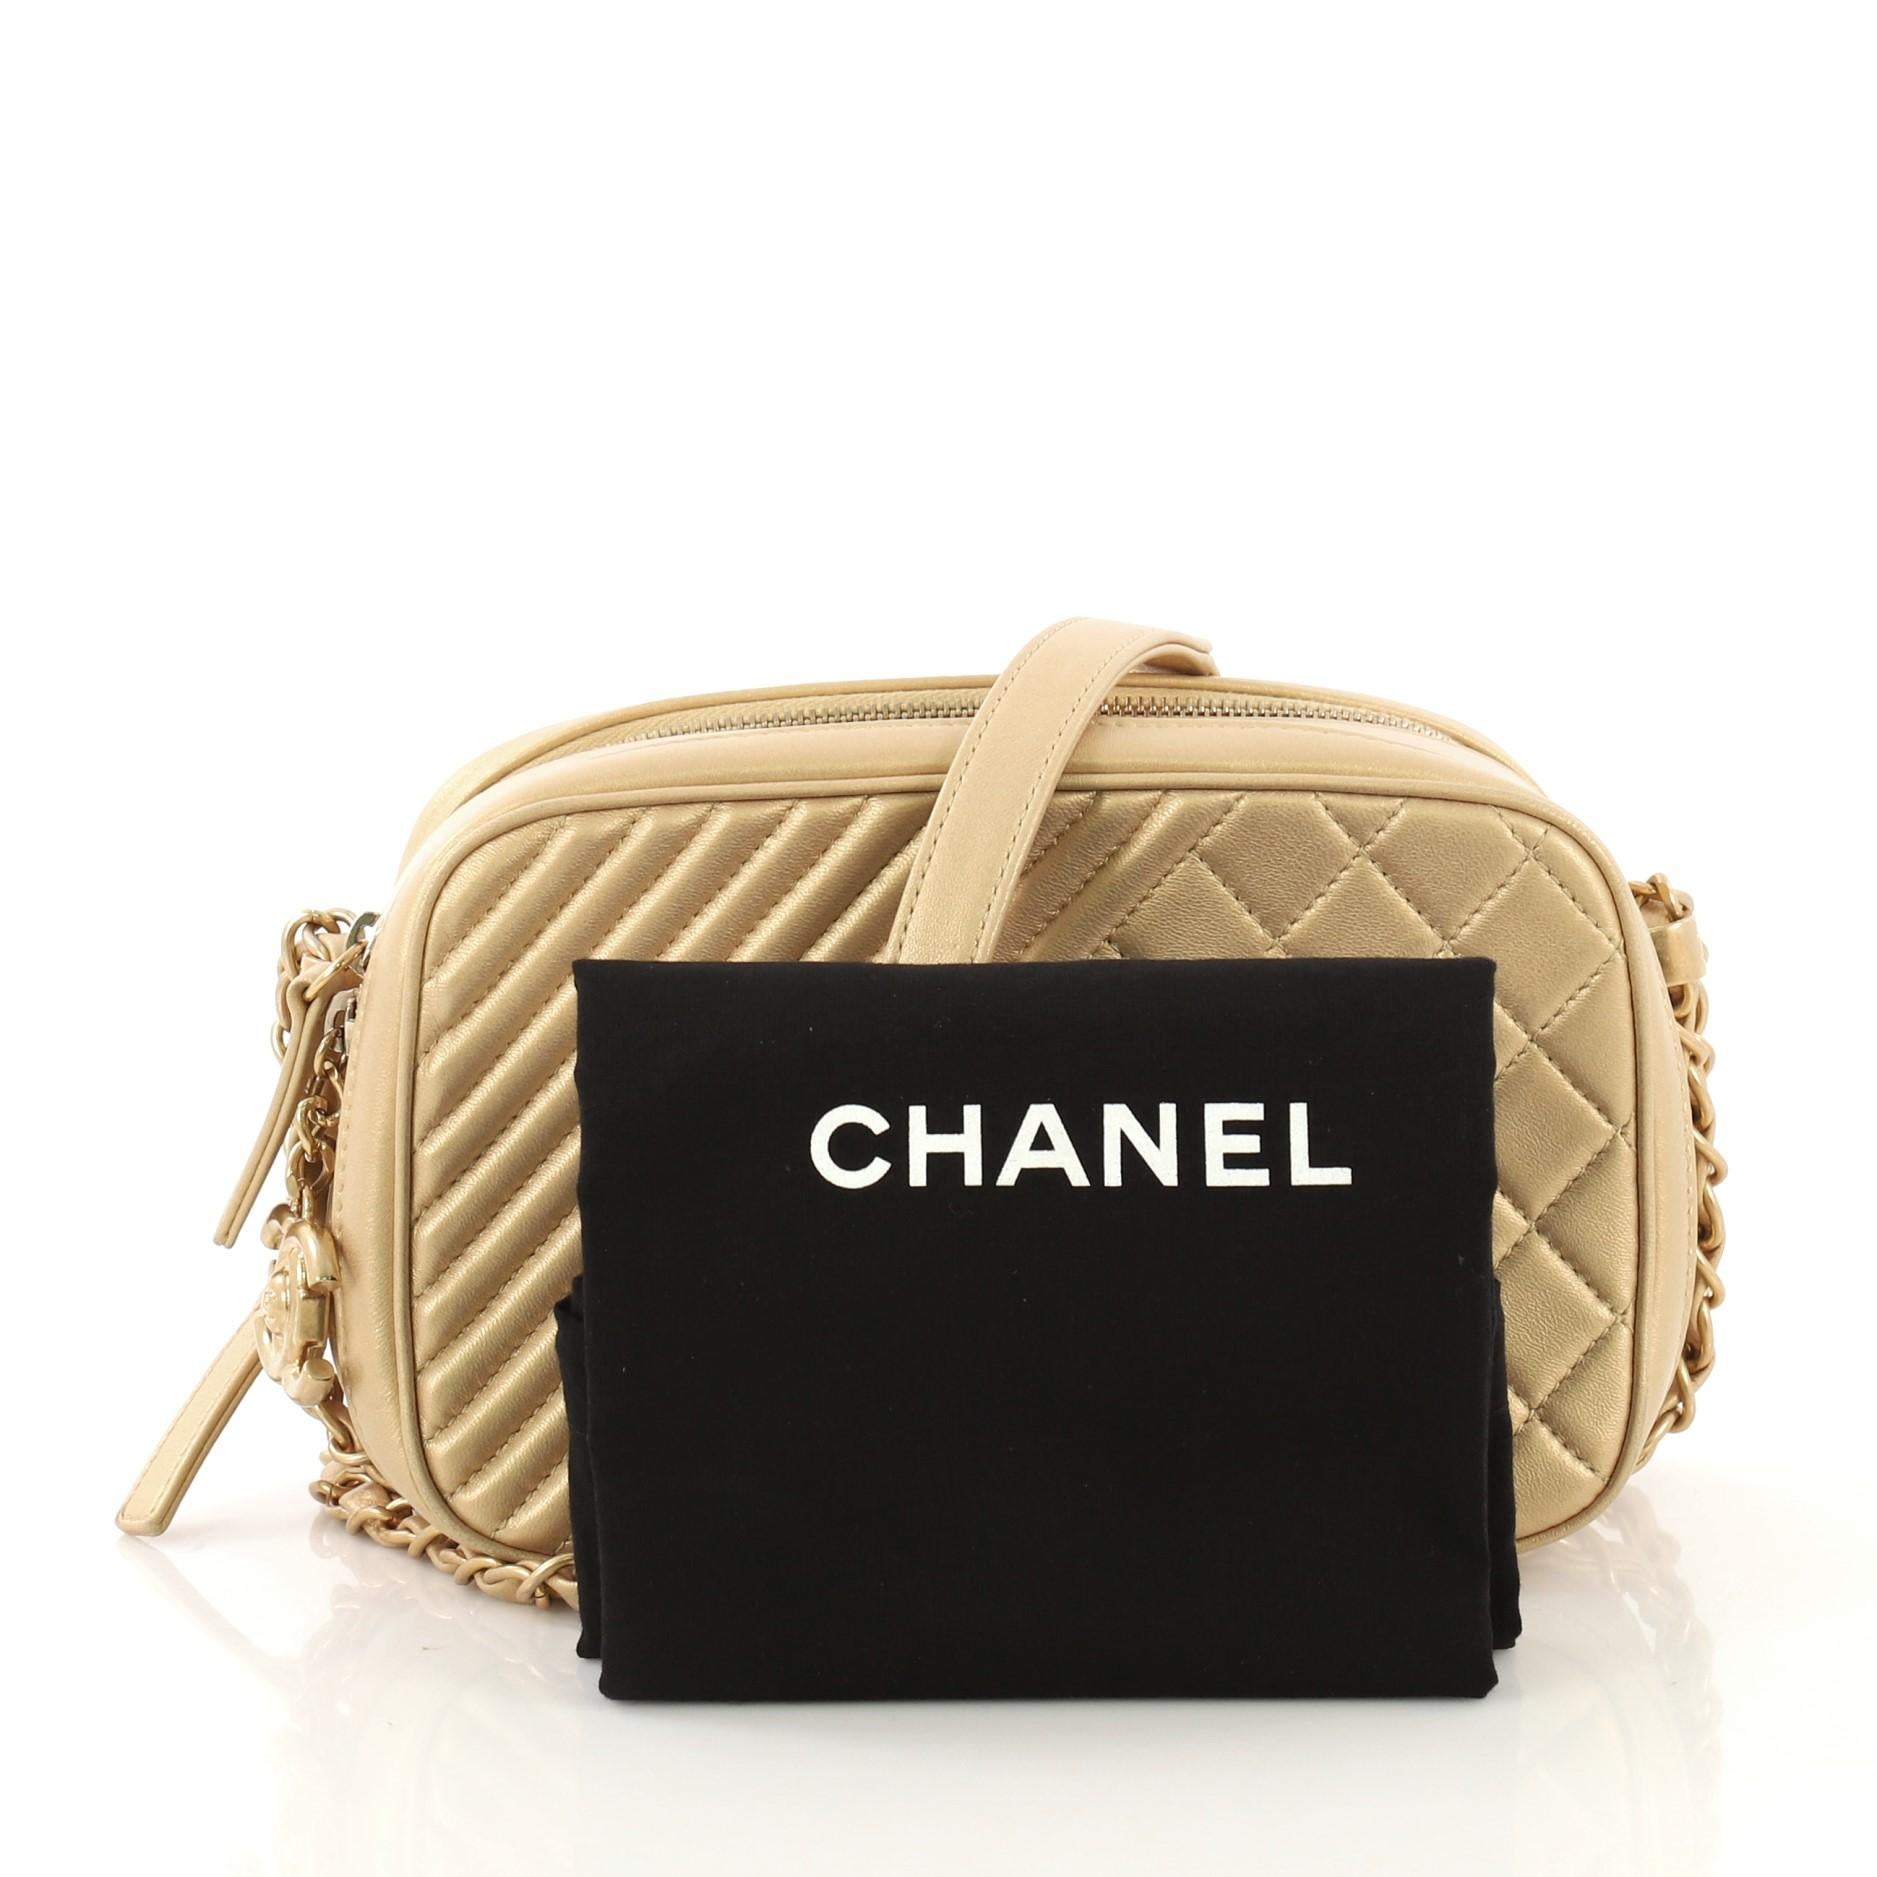 This Chanel Coco Boy Camera Bag Quilted Leather Small, crafted from gold quilted leather, features woven-in leather chain link strap with leather pad, two zip compartments, oversized CC charm, and matte gold-tone hardware. Its two-way zip closure